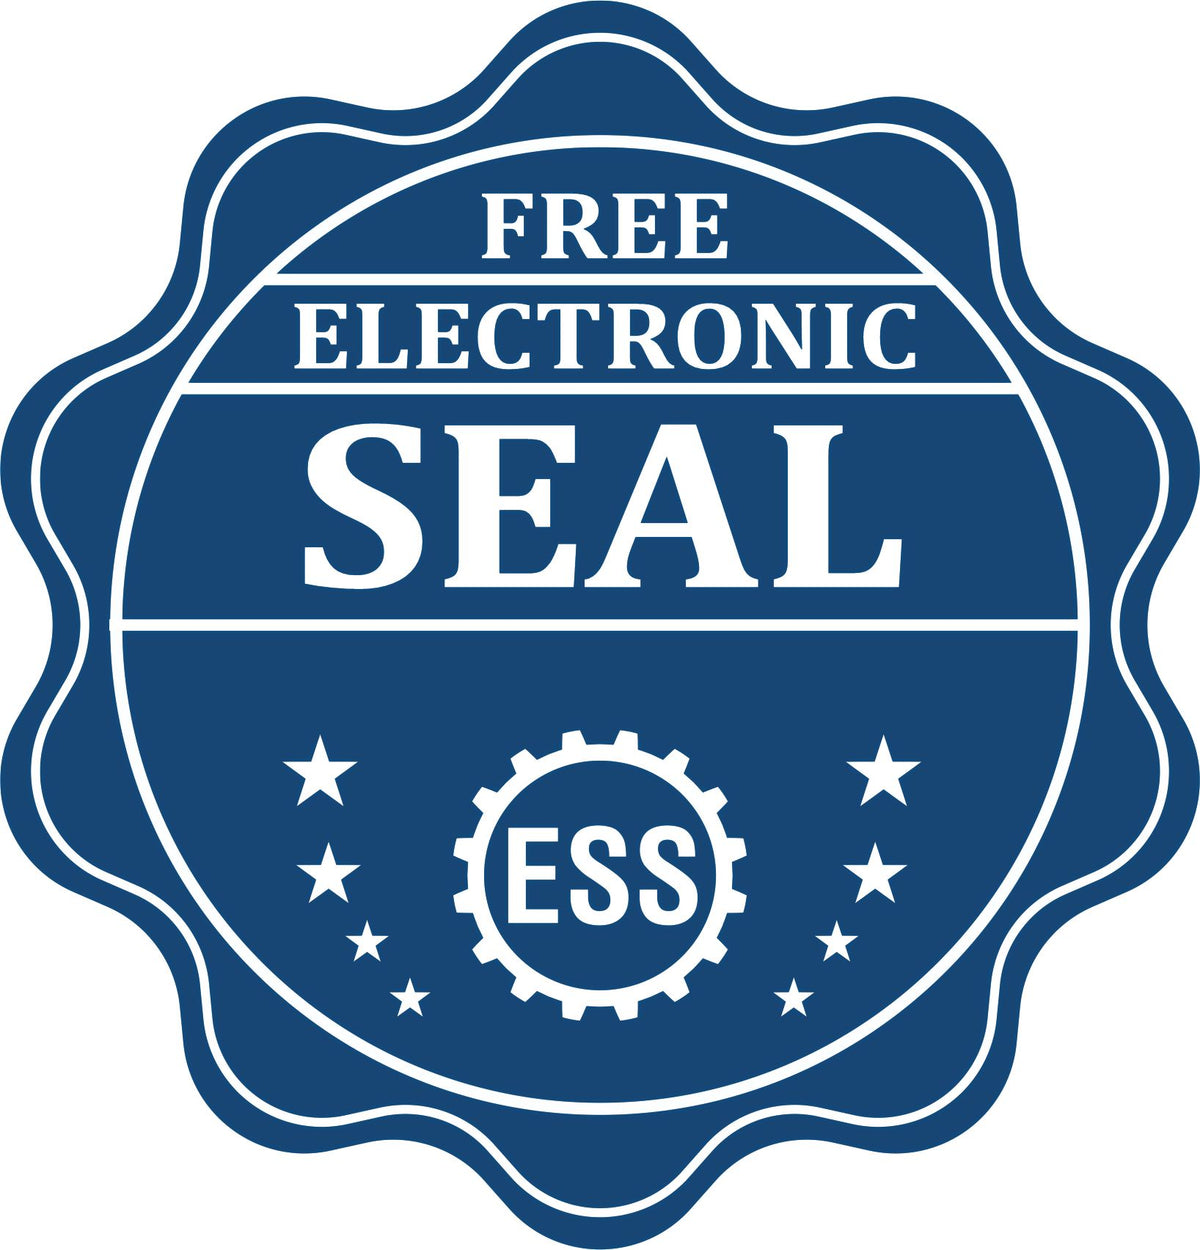 A badge showing a free electronic seal for the Gift New Jersey Engineer Seal with stars and the ESS gear on the emblem.